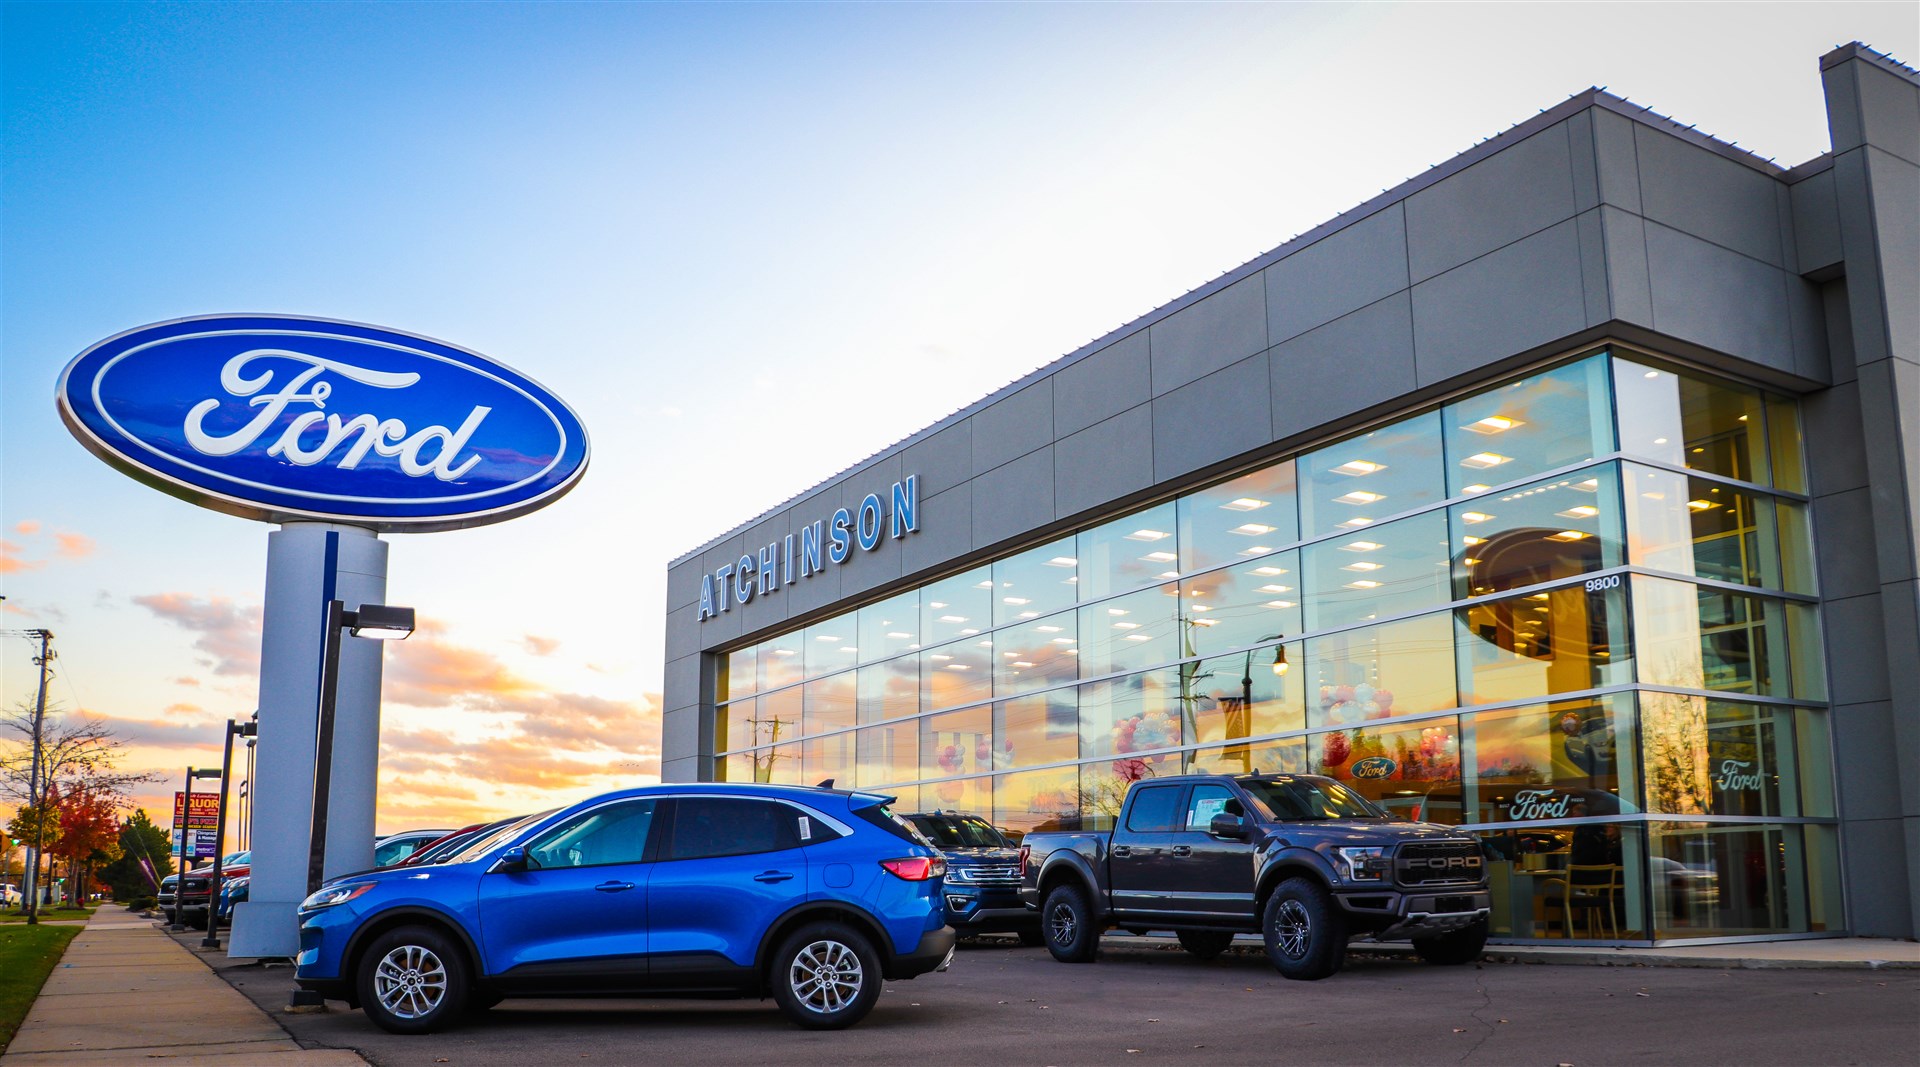 Atchinson Ford Sales, Inc.